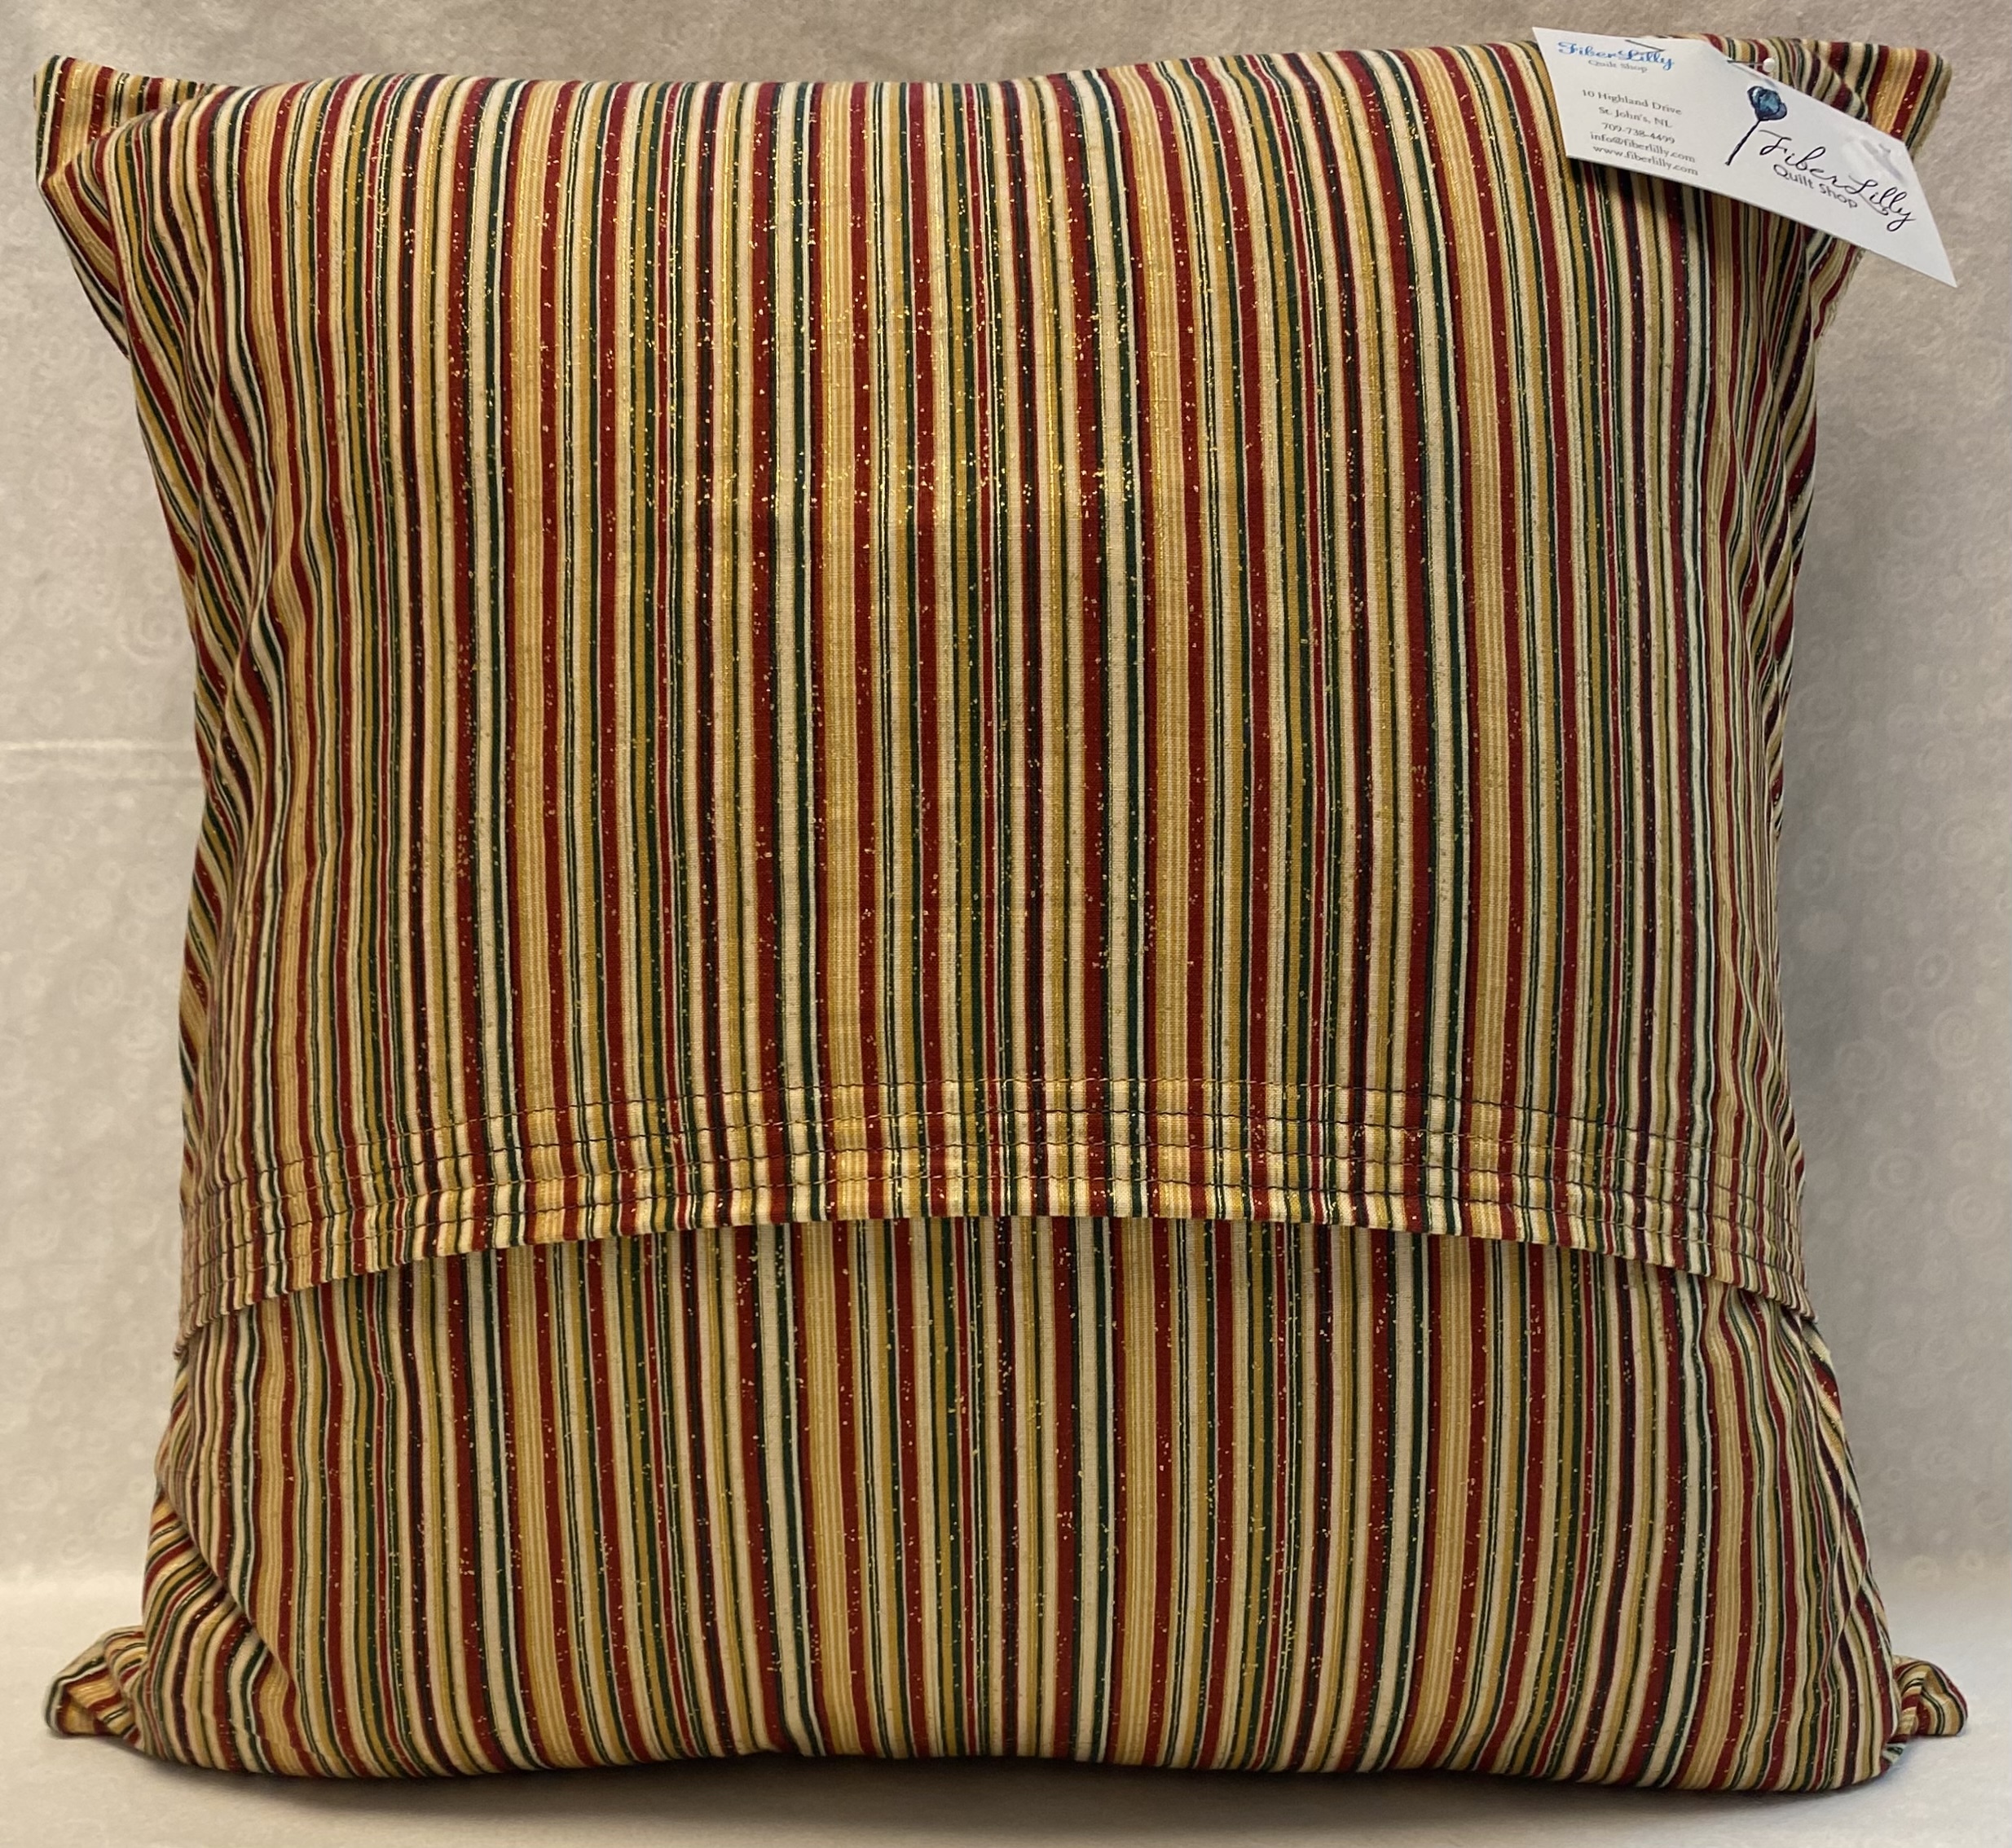 Twister Pillow Cover - 18”